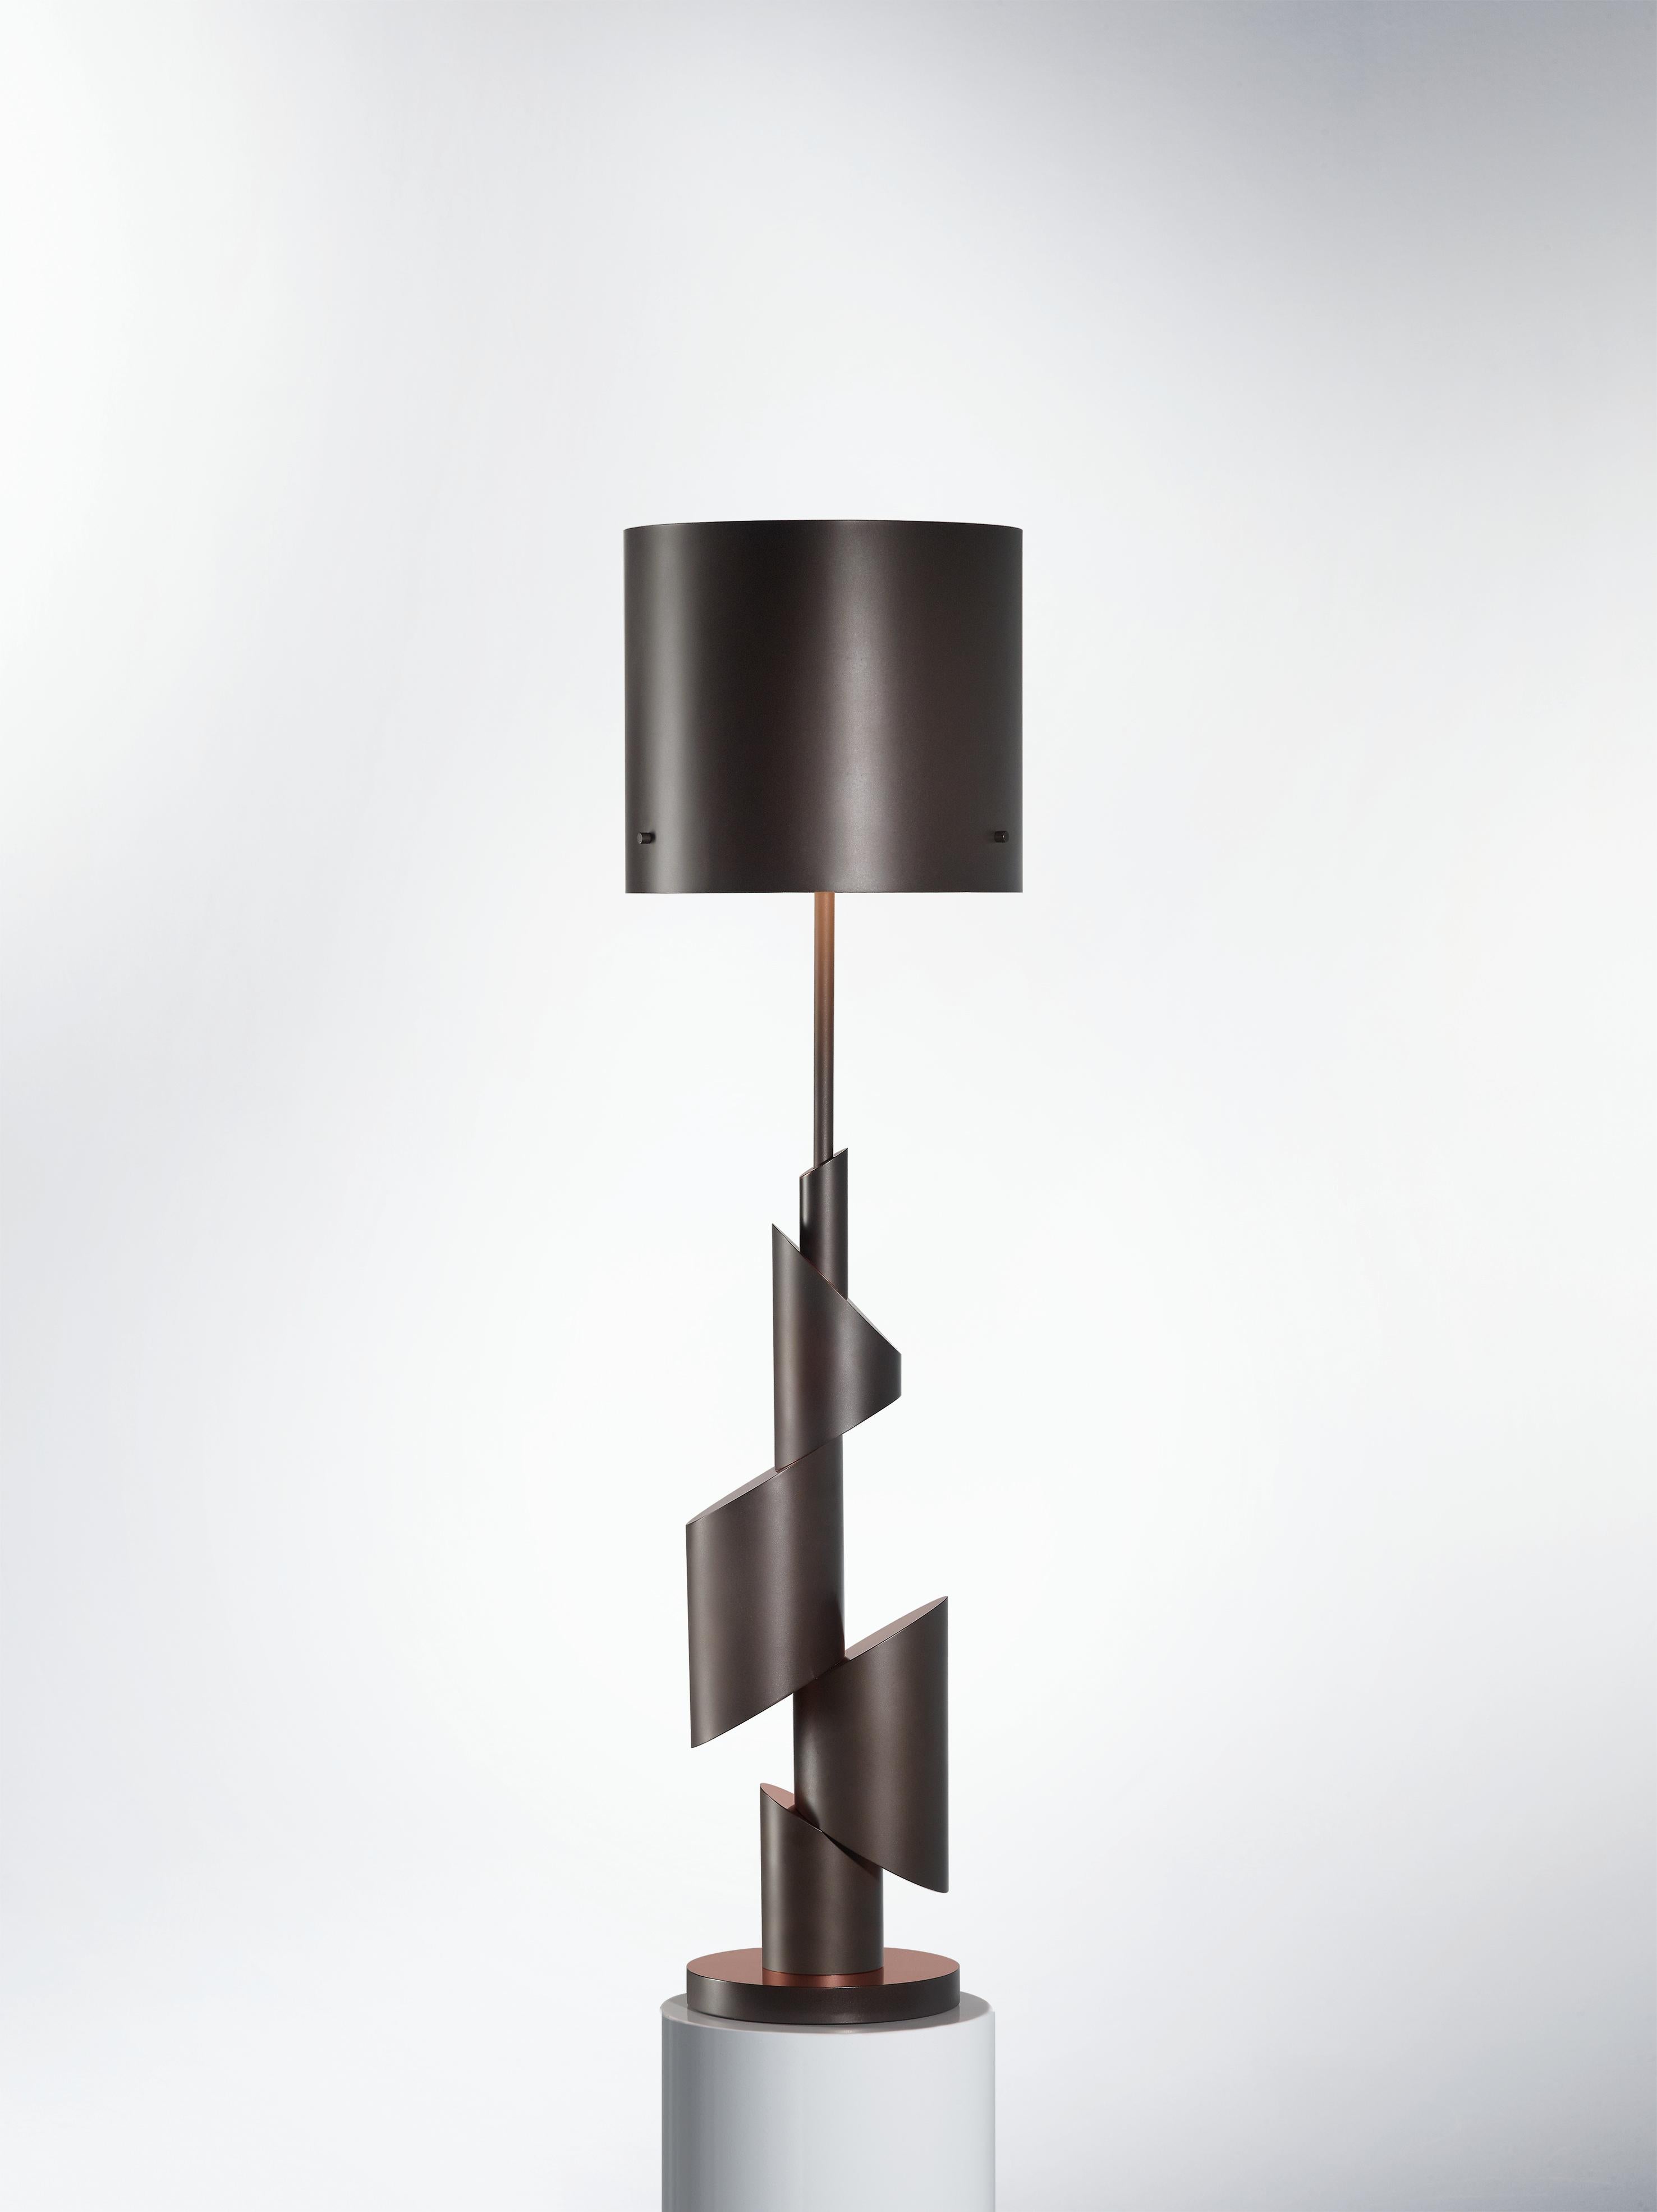 Modern KRS 1 Table Lamp with Smoked Nickel and Copper Finish